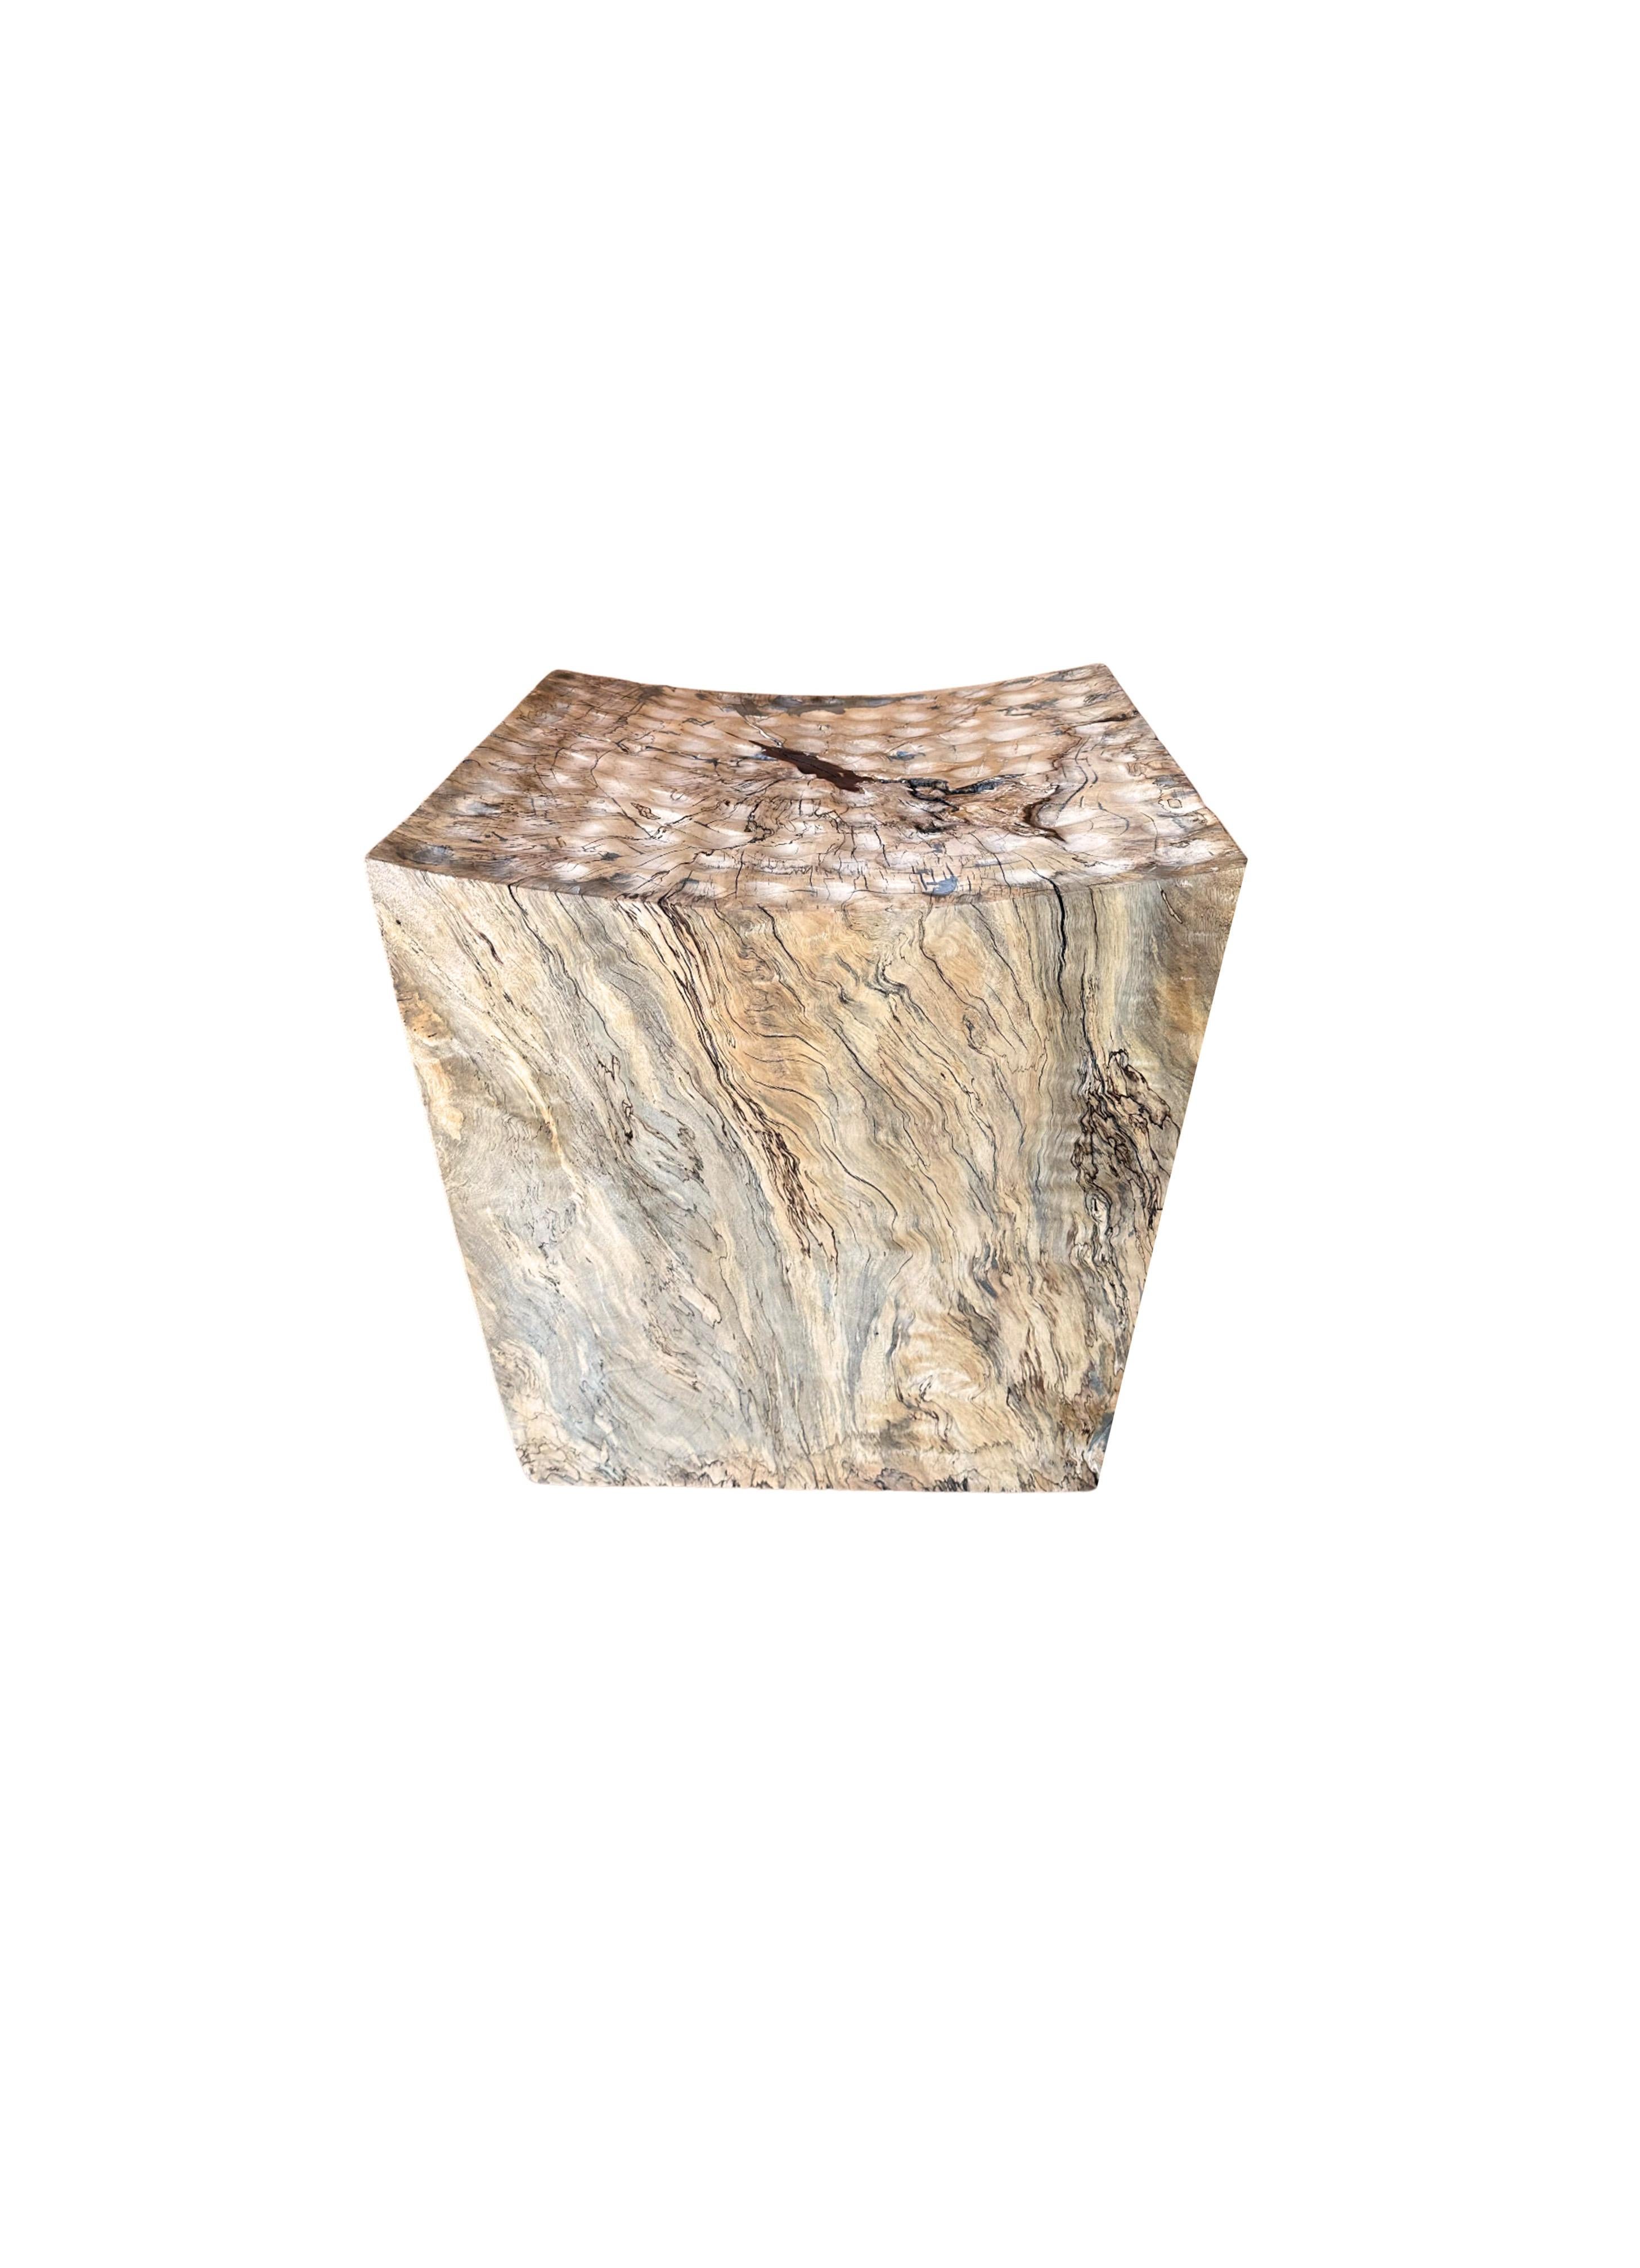 A wonderfully sculptural stool with mix of wood textures and shades. A uniquely sculptural and versatile piece, this chair was crafted from a single block of tamarind wood. This wood features elegant markings that resemble a block of marble.